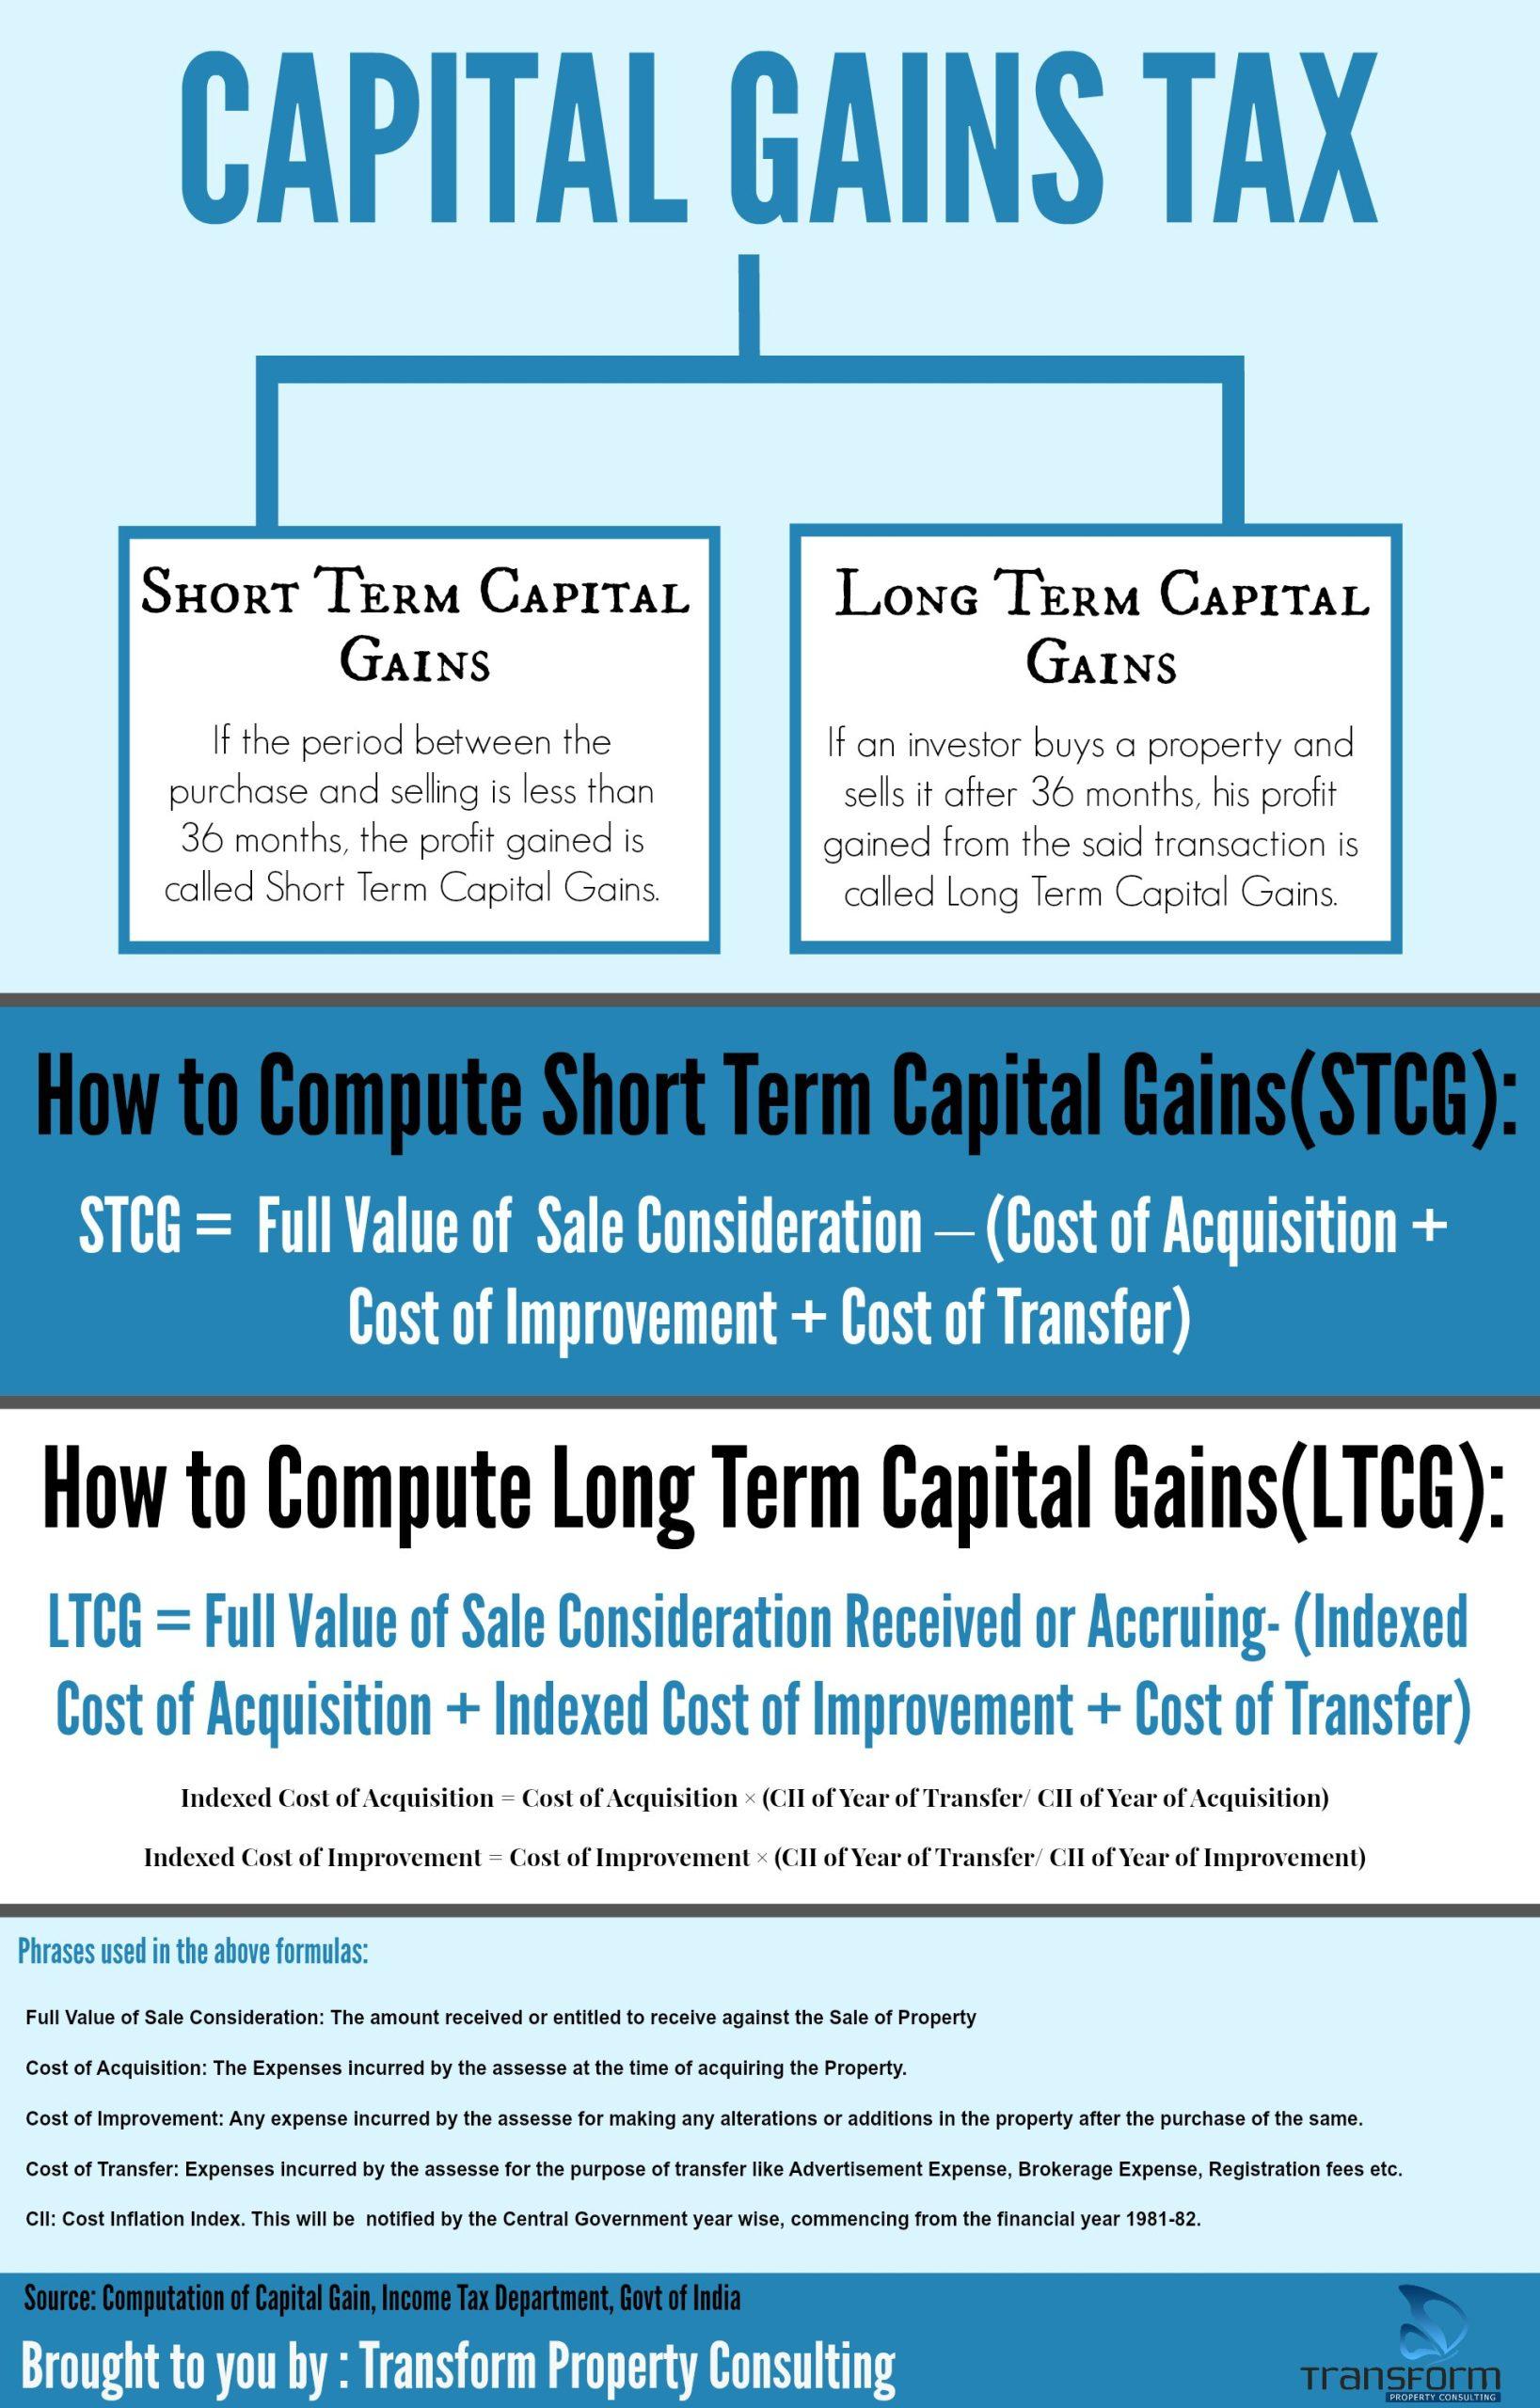 When do i pay capital gains tax on real estate